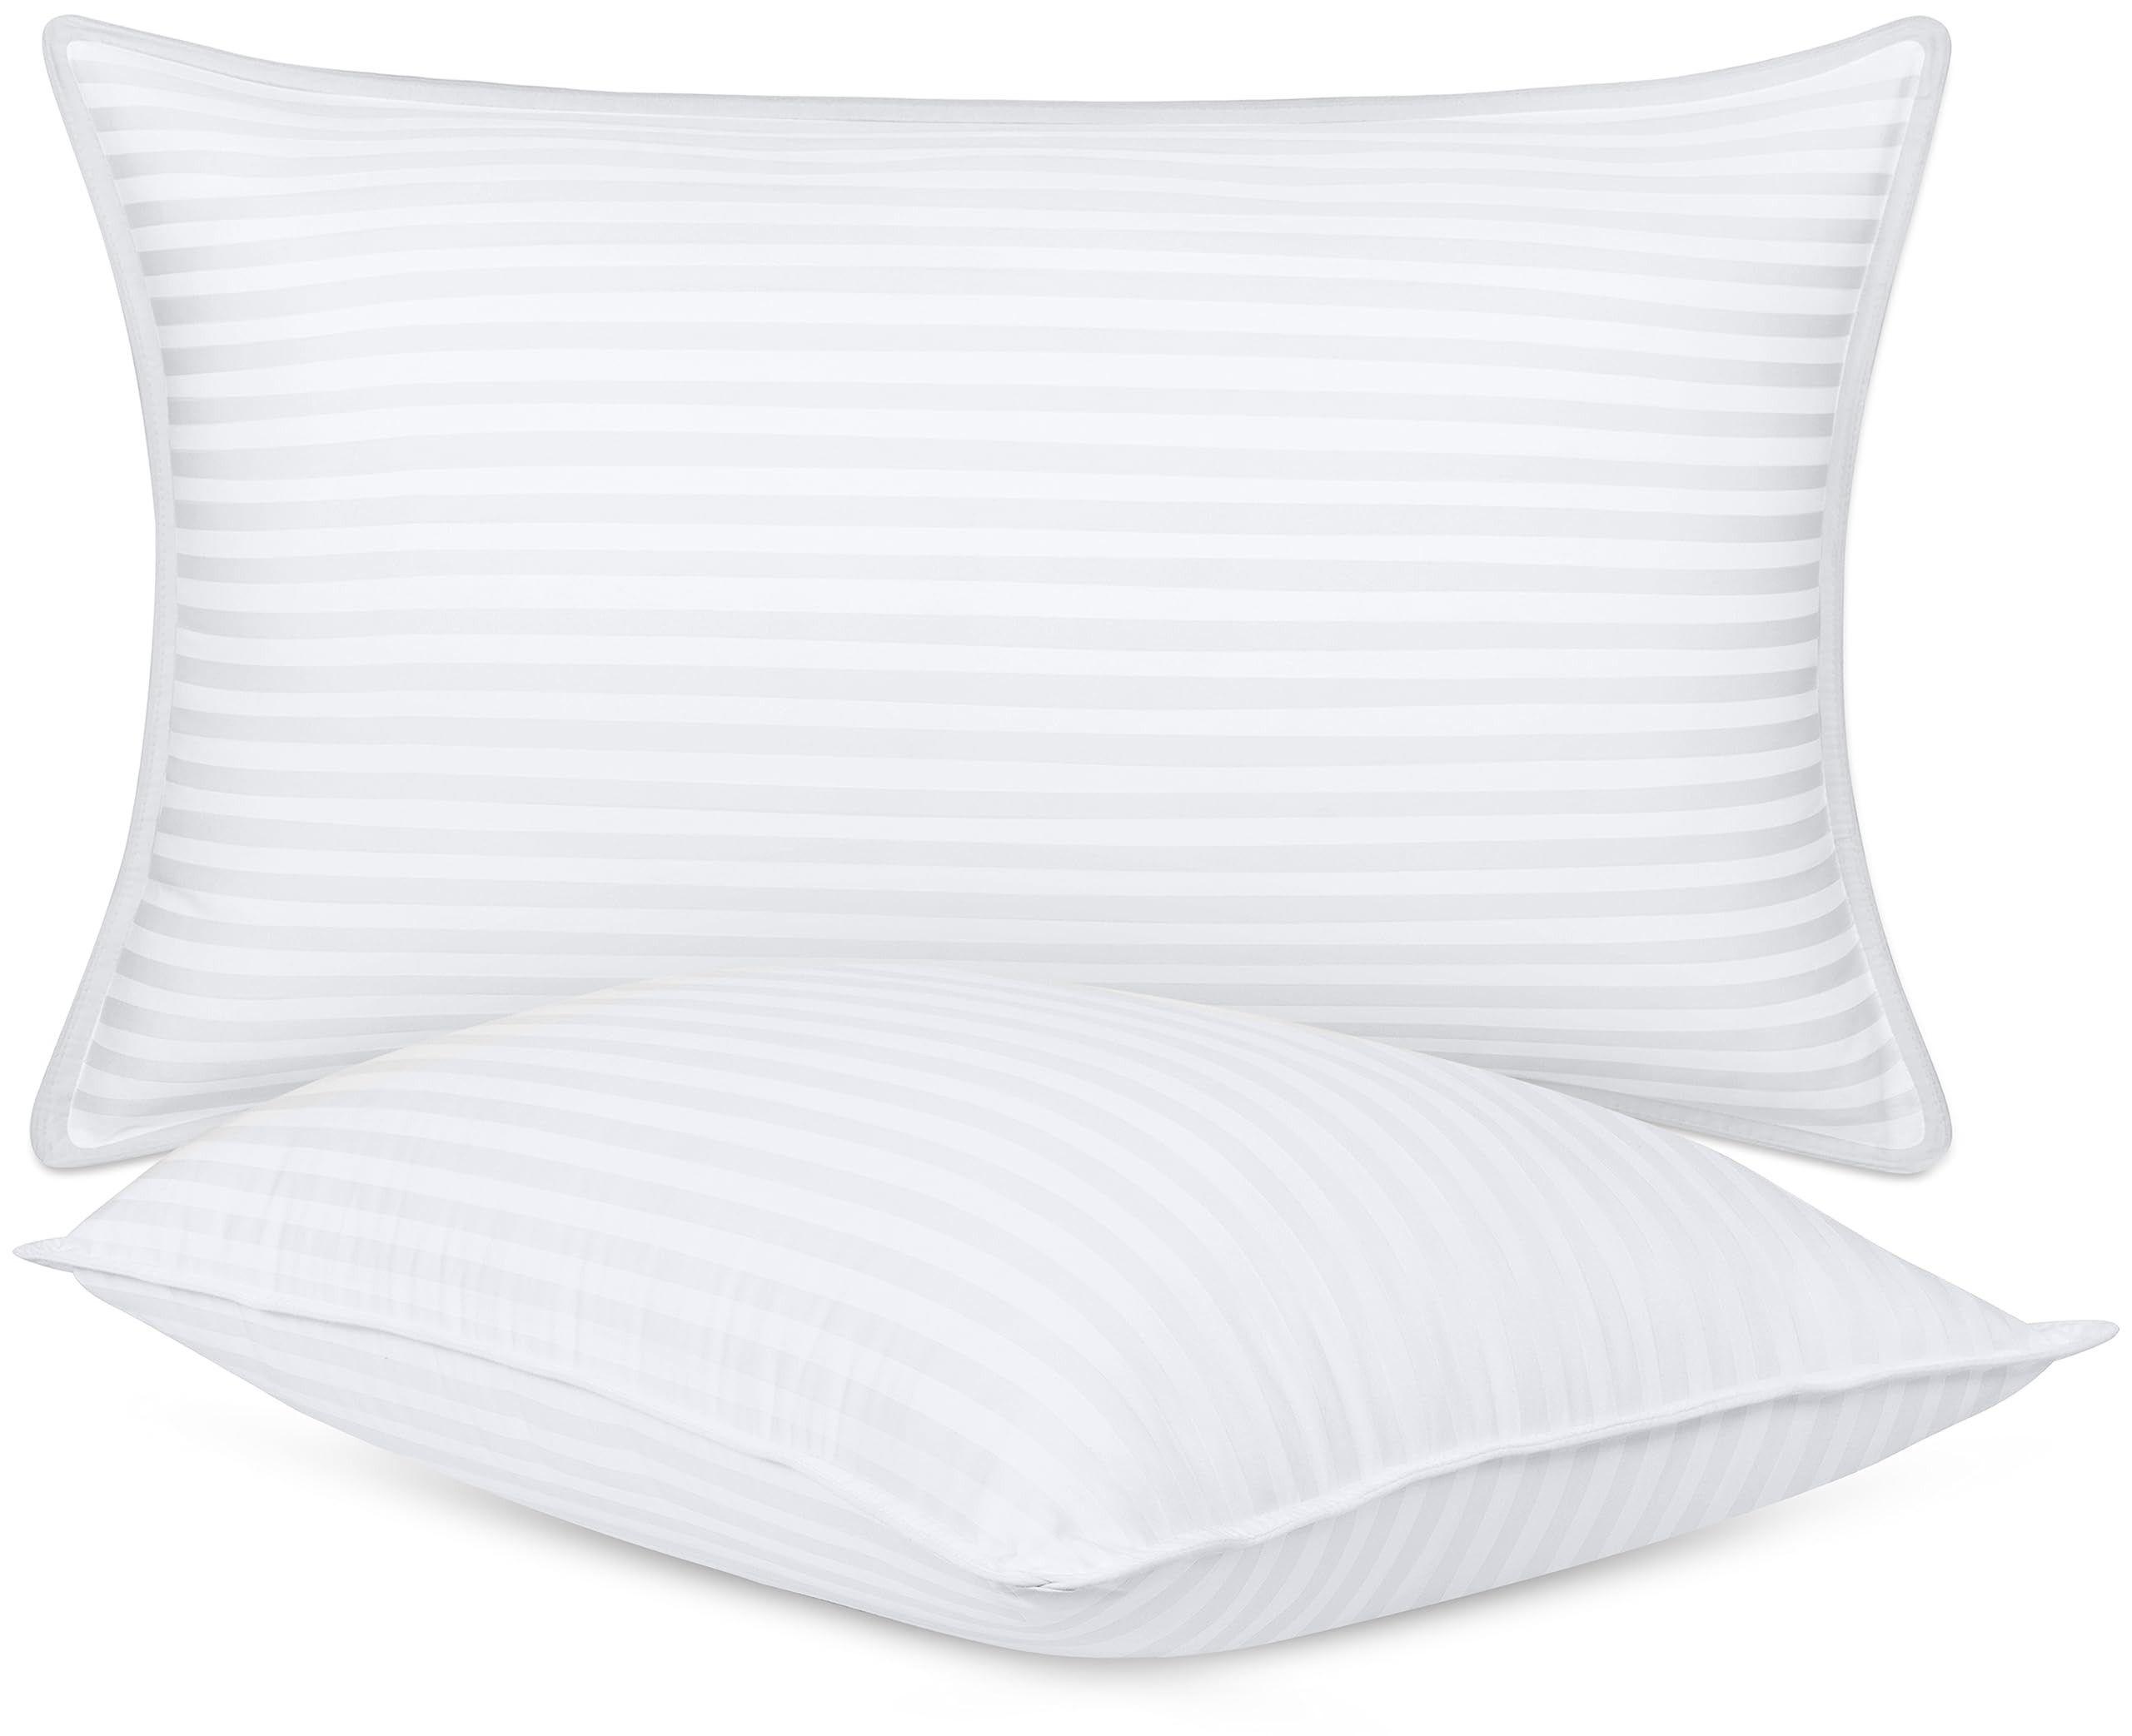 Utopia Bedding Bed Pillows for Sleeping King Size (White), Set of 2, Cooling Hotel Quality, for B... | Amazon (US)